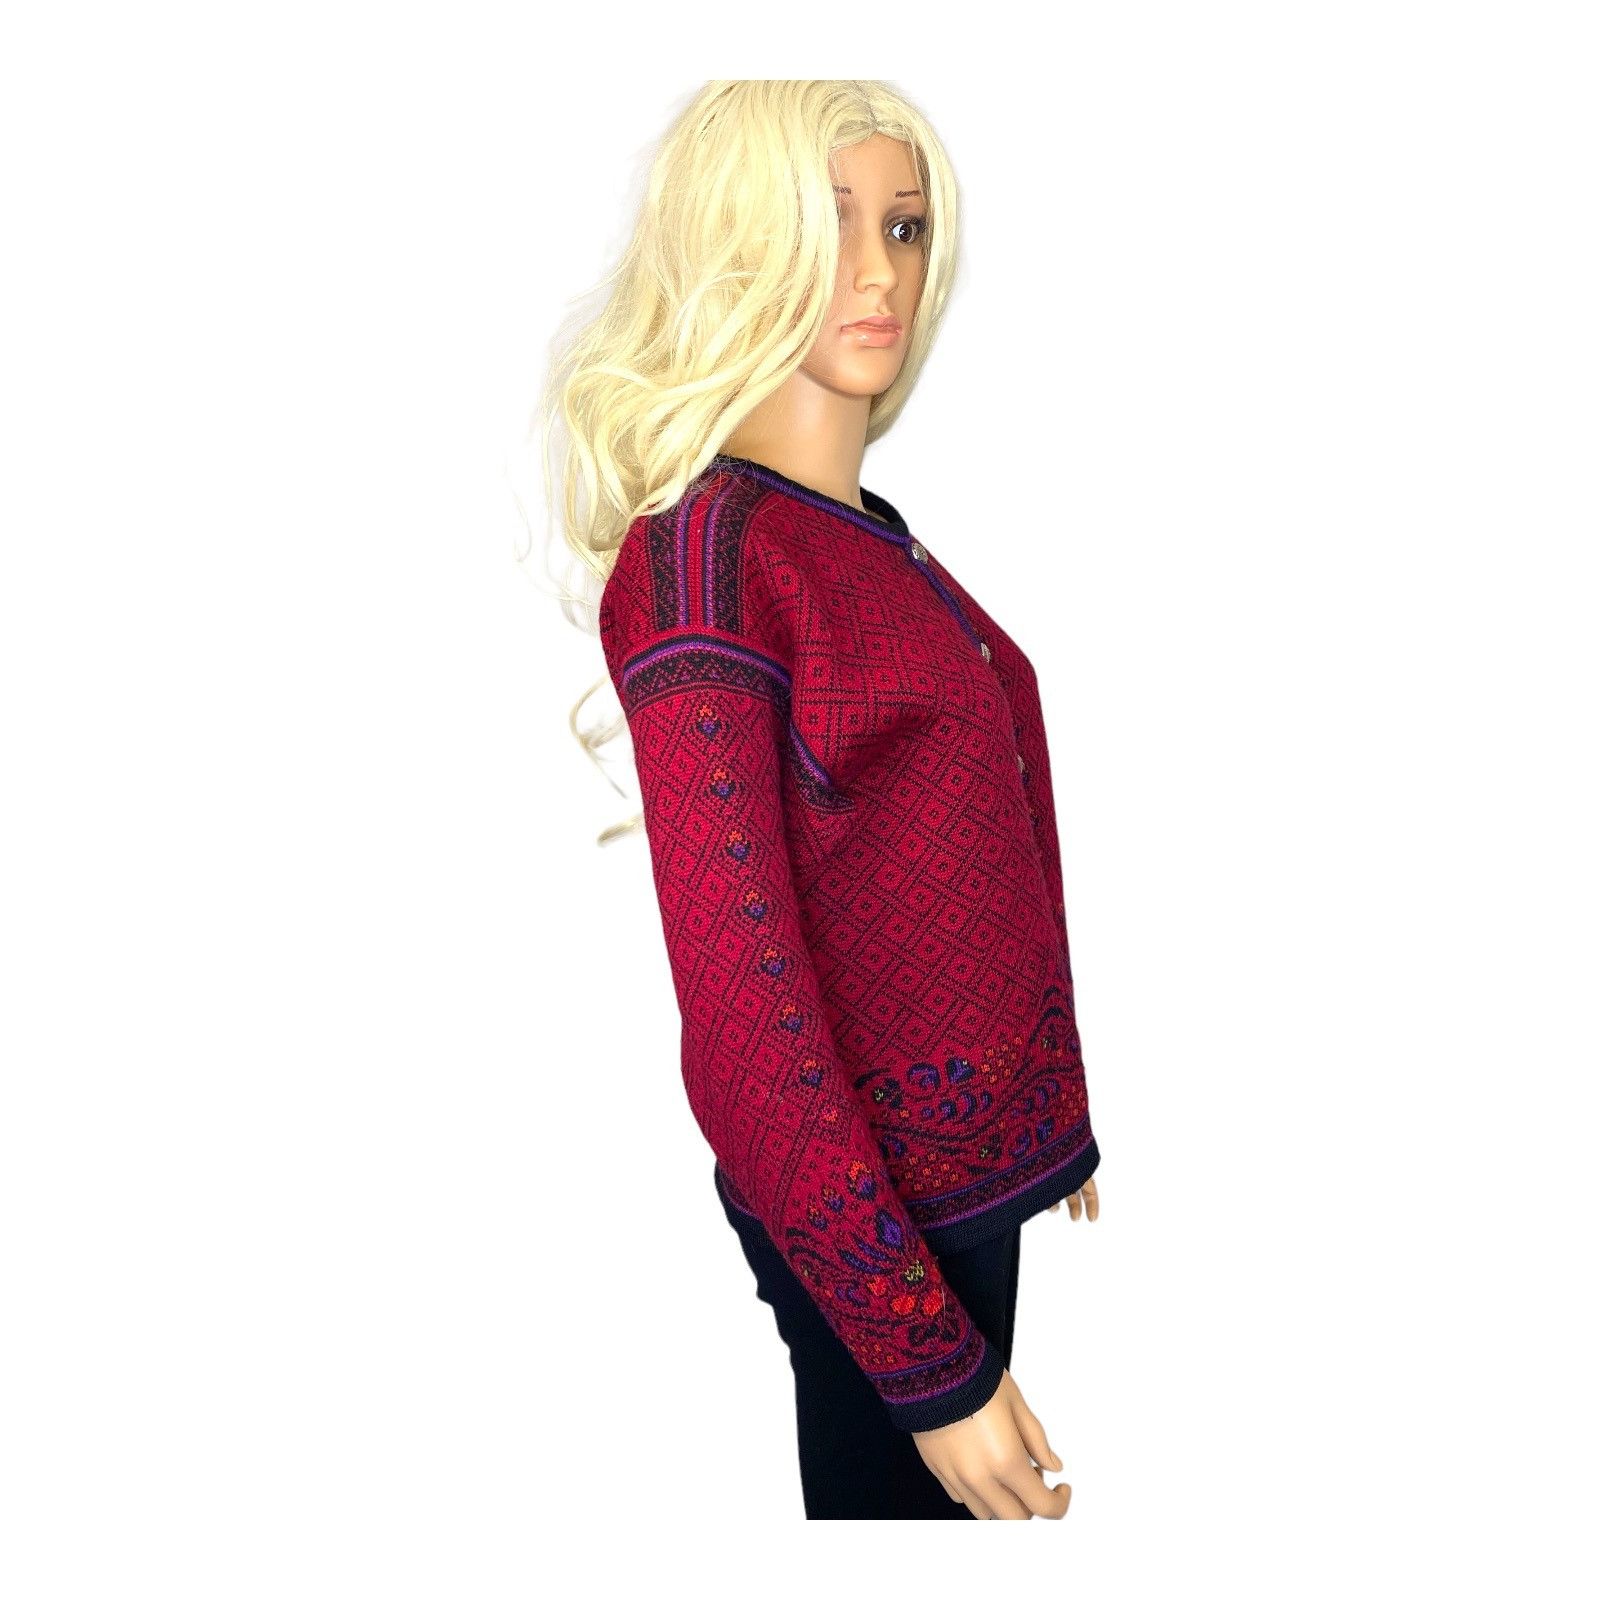 Dale Of Norway Dale of Norway Wool Cardigan Sweater Red Purple Pewter Butto Size M / US 6-8 / IT 42-44 - 12 Thumbnail